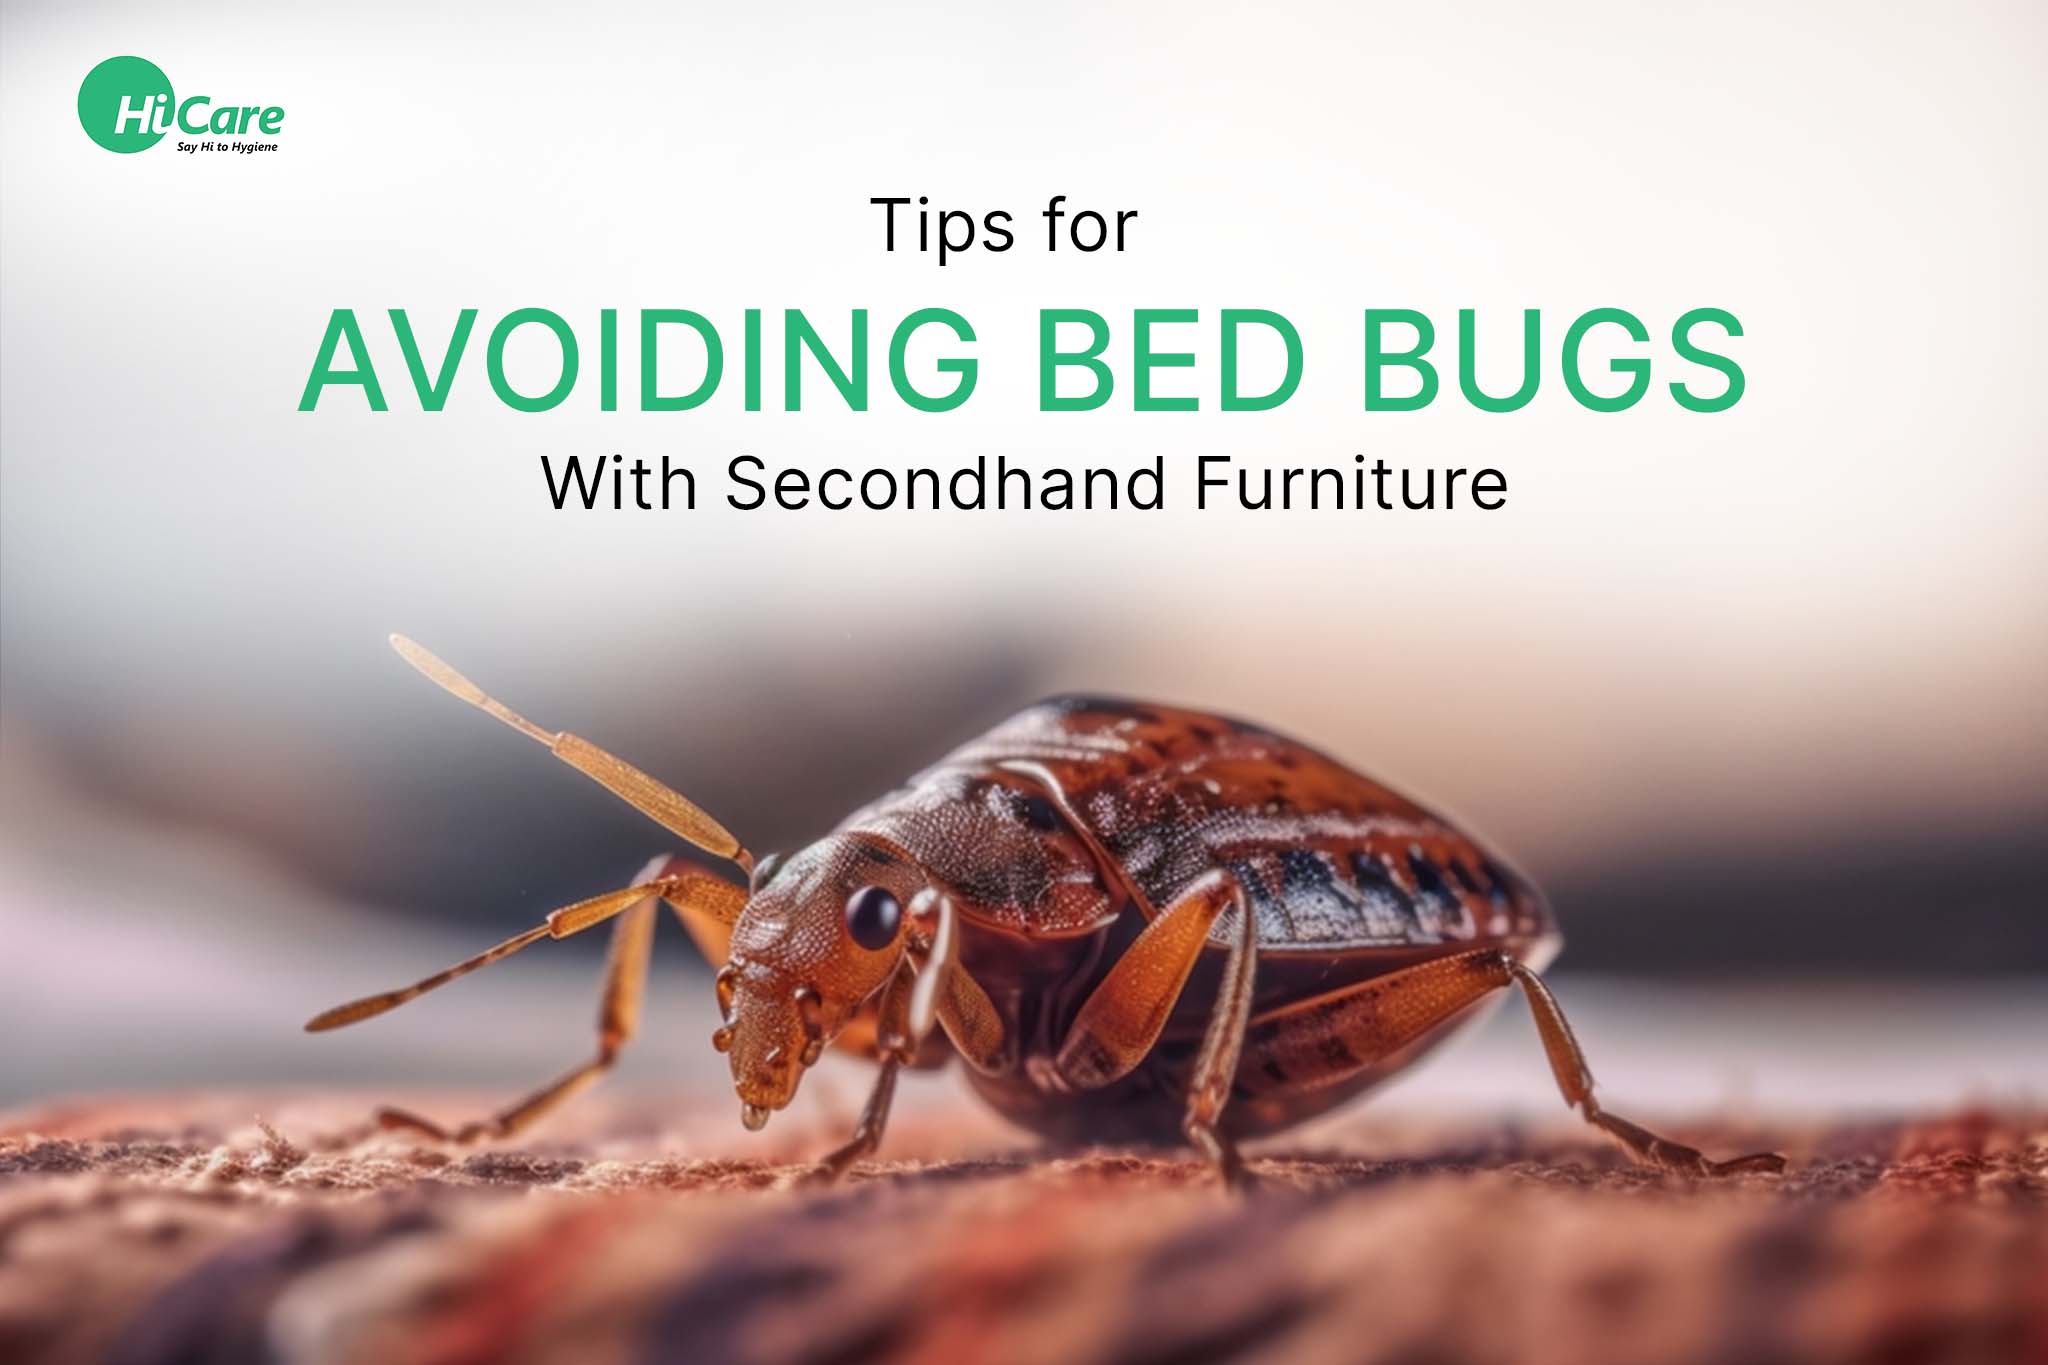 5 Tips for Avoiding Bed Bugs With Secondhand Furniture